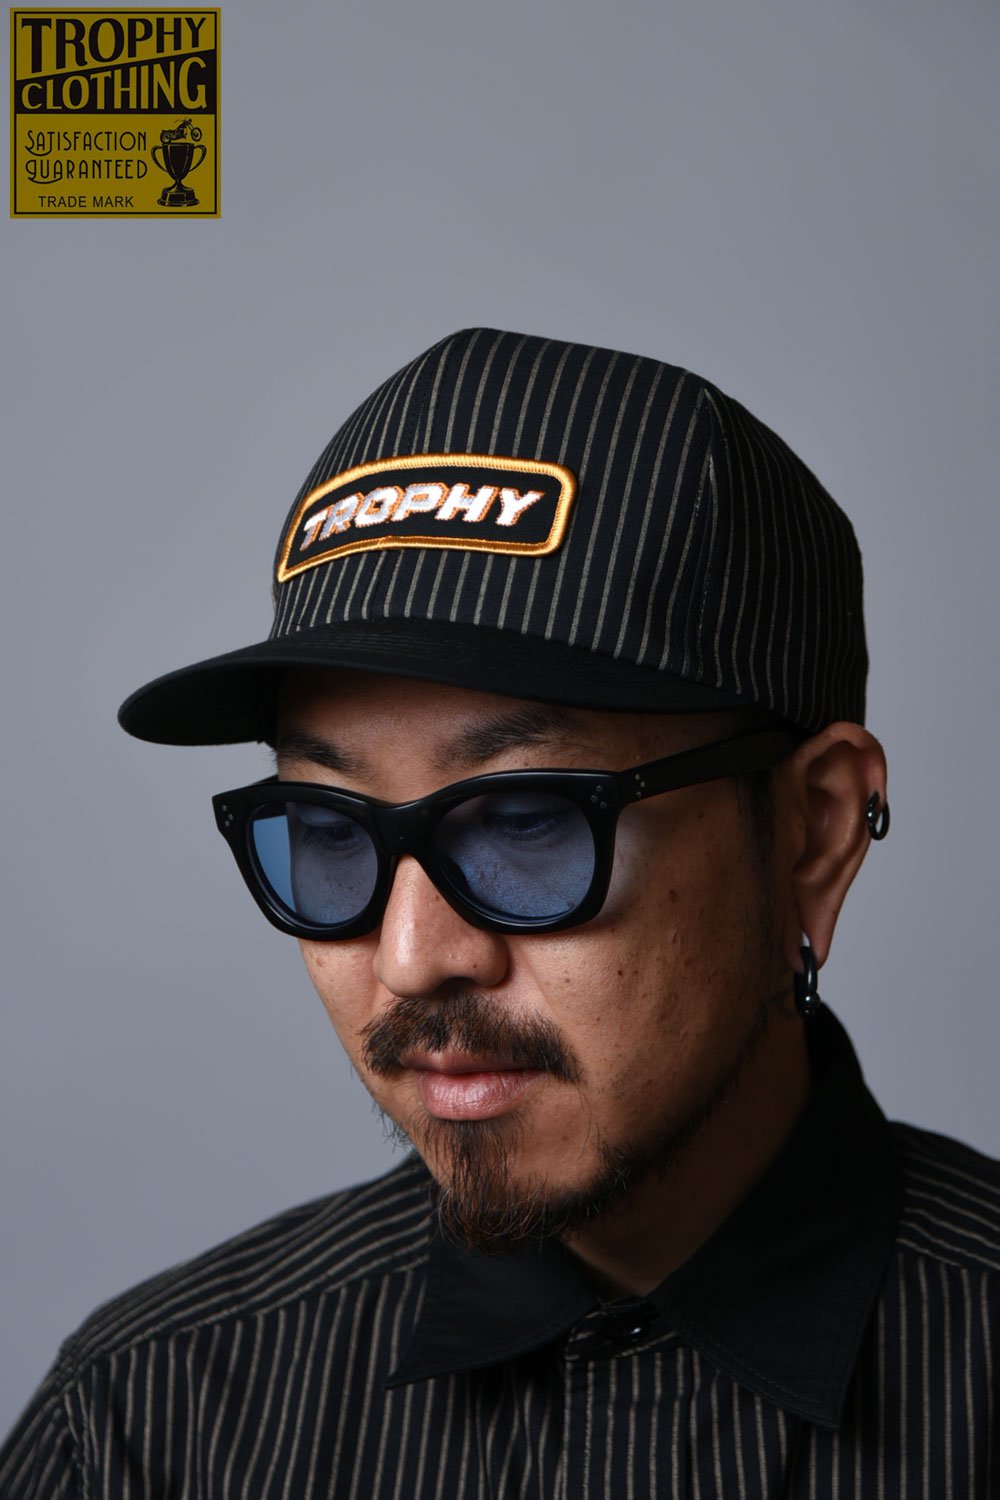 TROPHY CLOTHING(トロフィークロージング) ワークキャップ GAS WORKER TRACKER CAP TR22SS-707  通販正規取扱 | ハーレムストア公式通販サイト